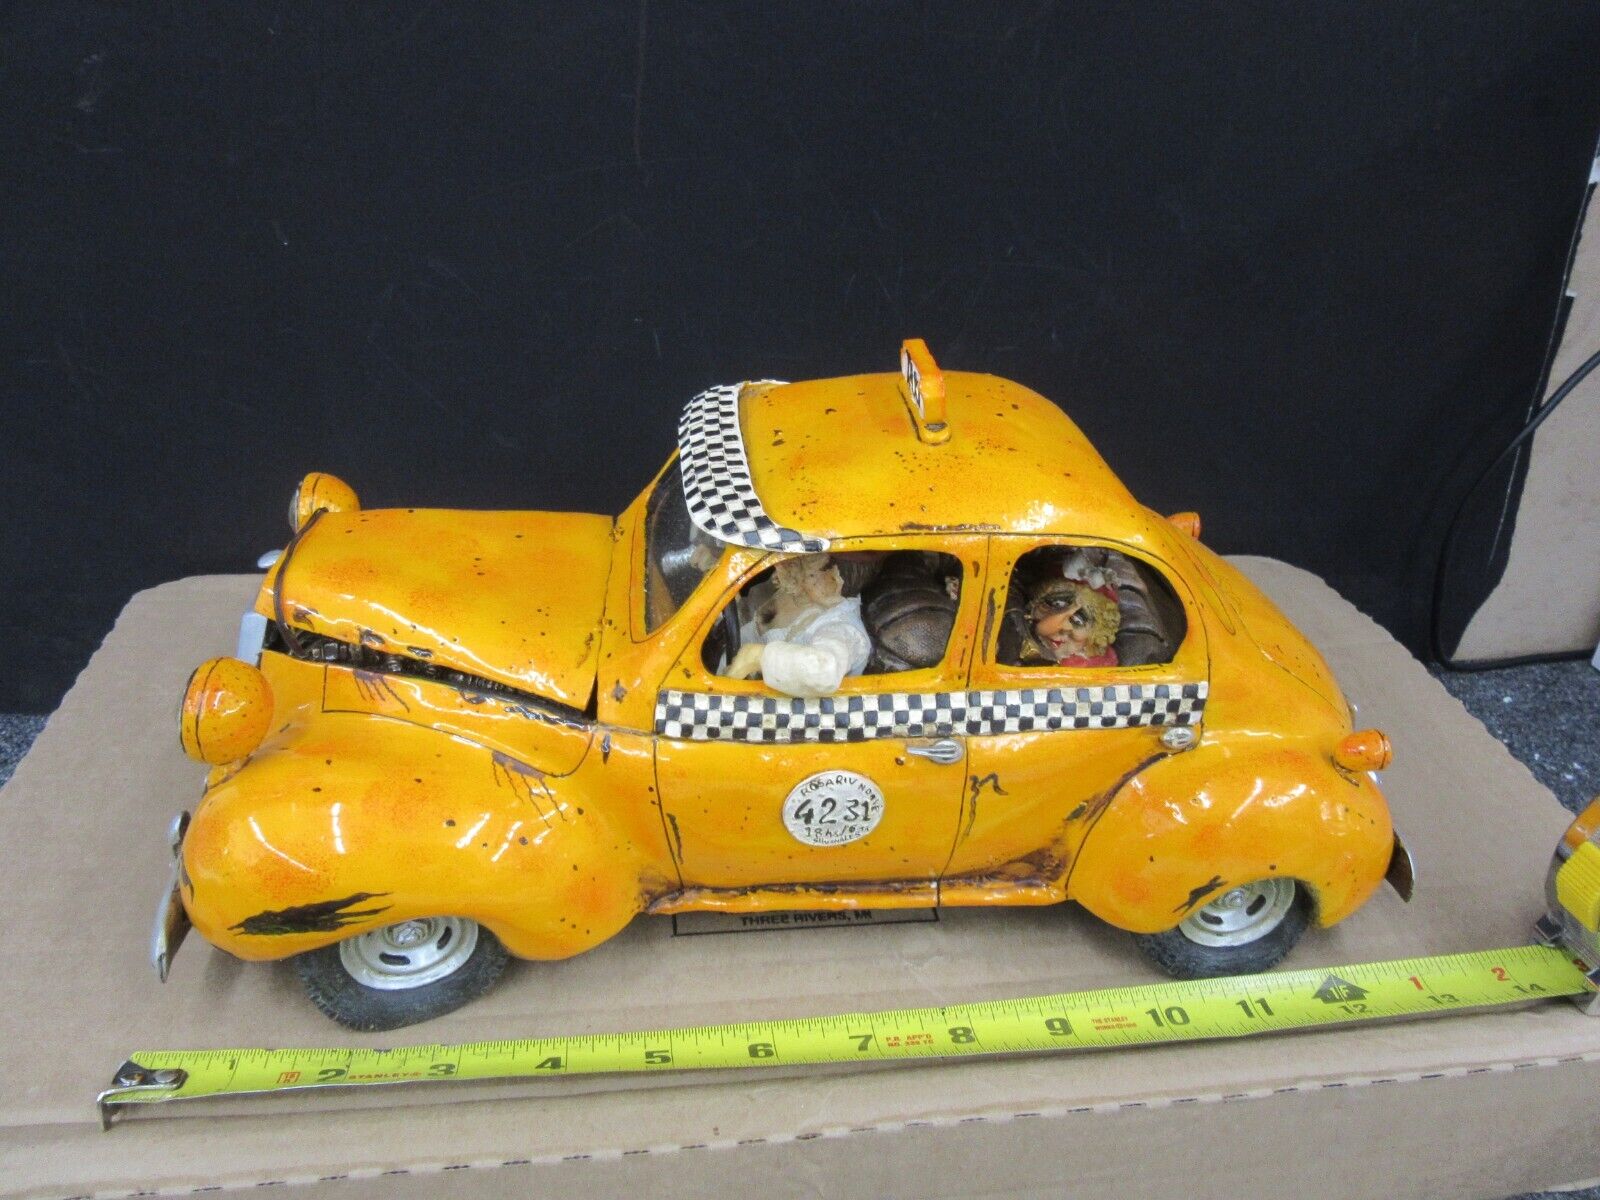 Guillermo Forchino taxi cab 85003 resin sculpture COMIC ART Car yellow 2004